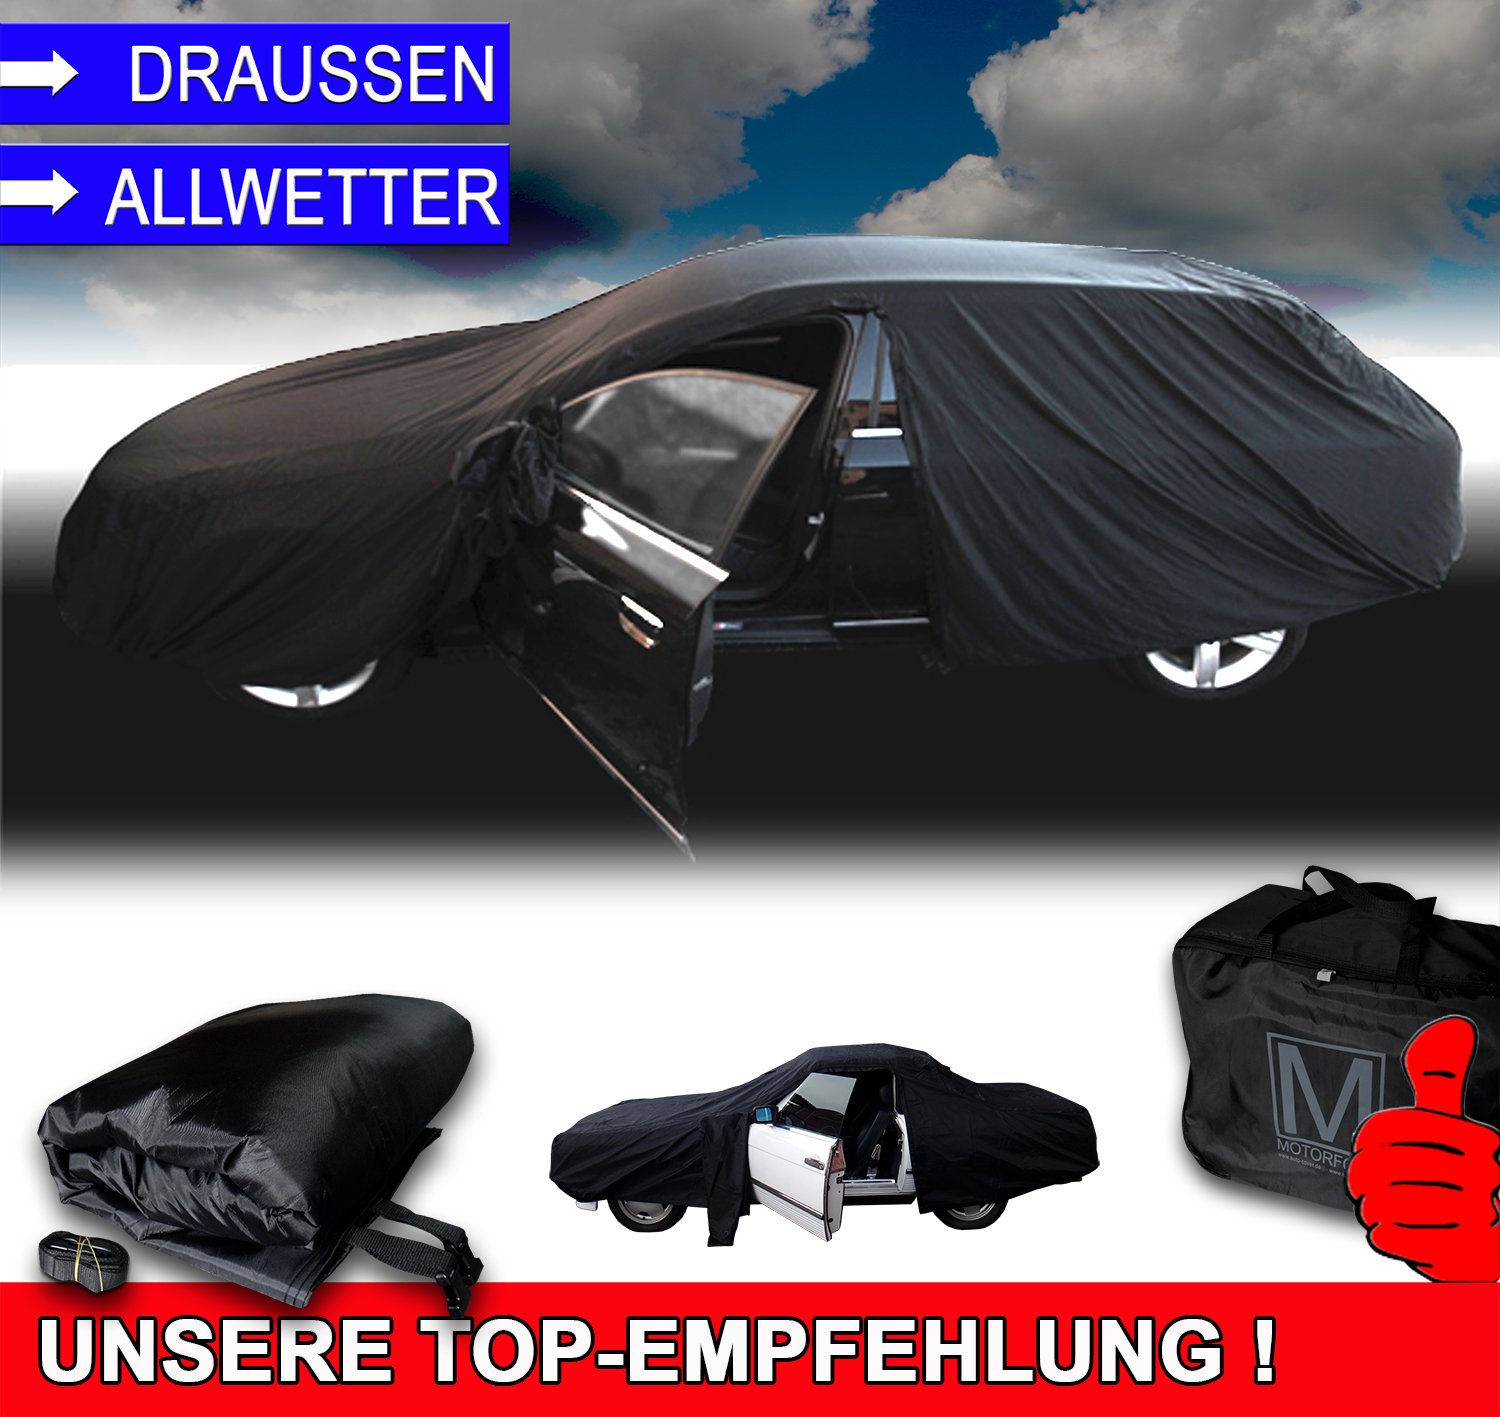 Optimo Outdoor Car Cover for BMW 5 series G31 Touring (2017-)